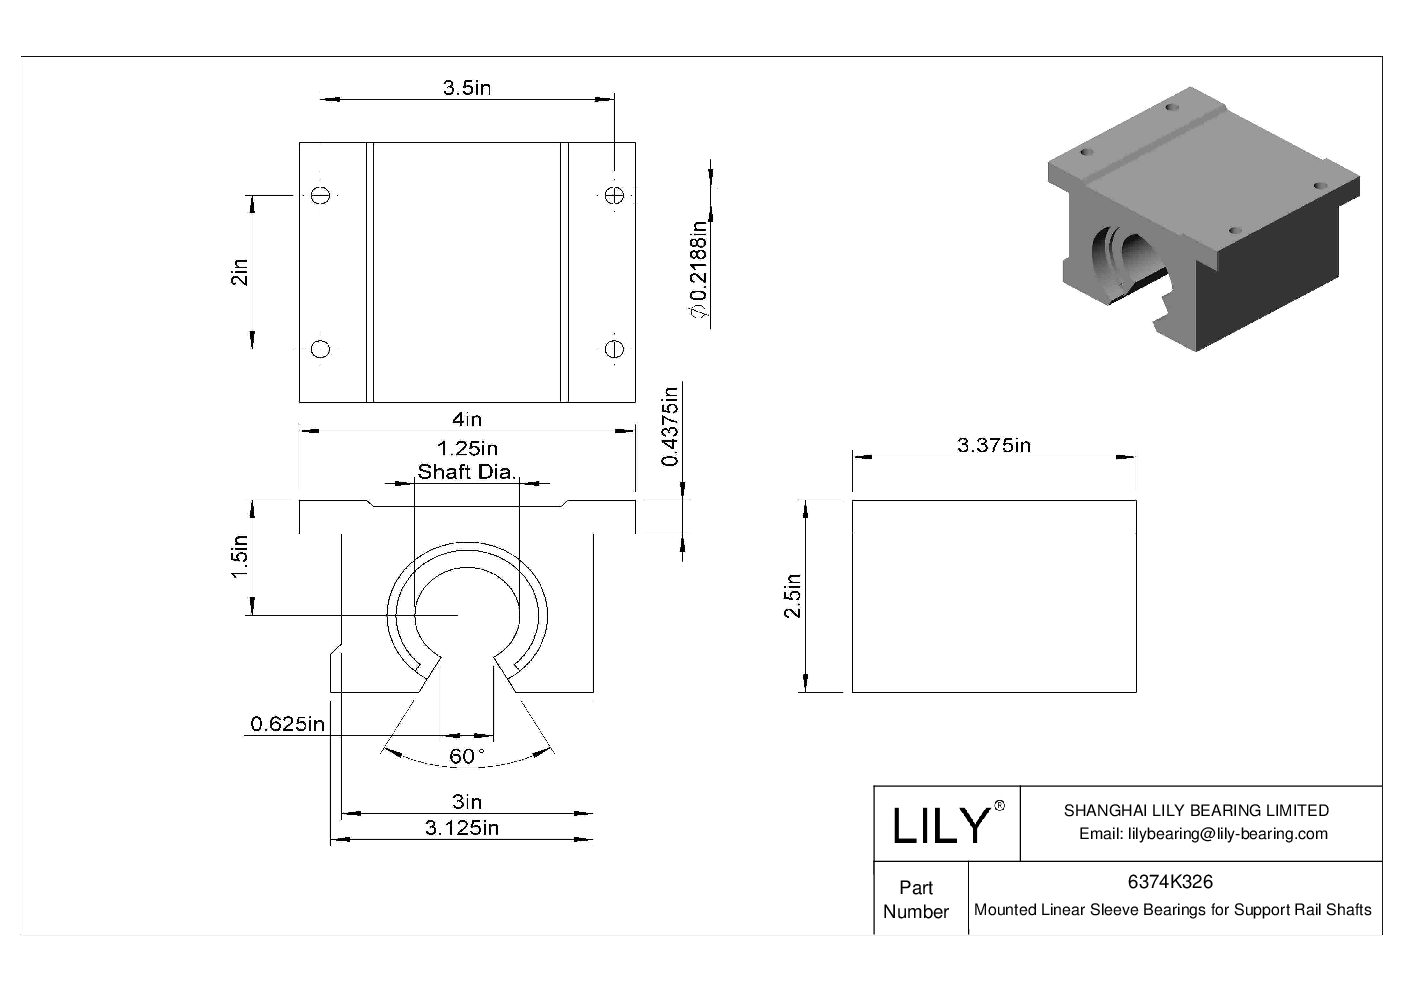 GDHEKDCG Common Mounted Linear Sleeve Bearings for Support Rail Shafts cad drawing